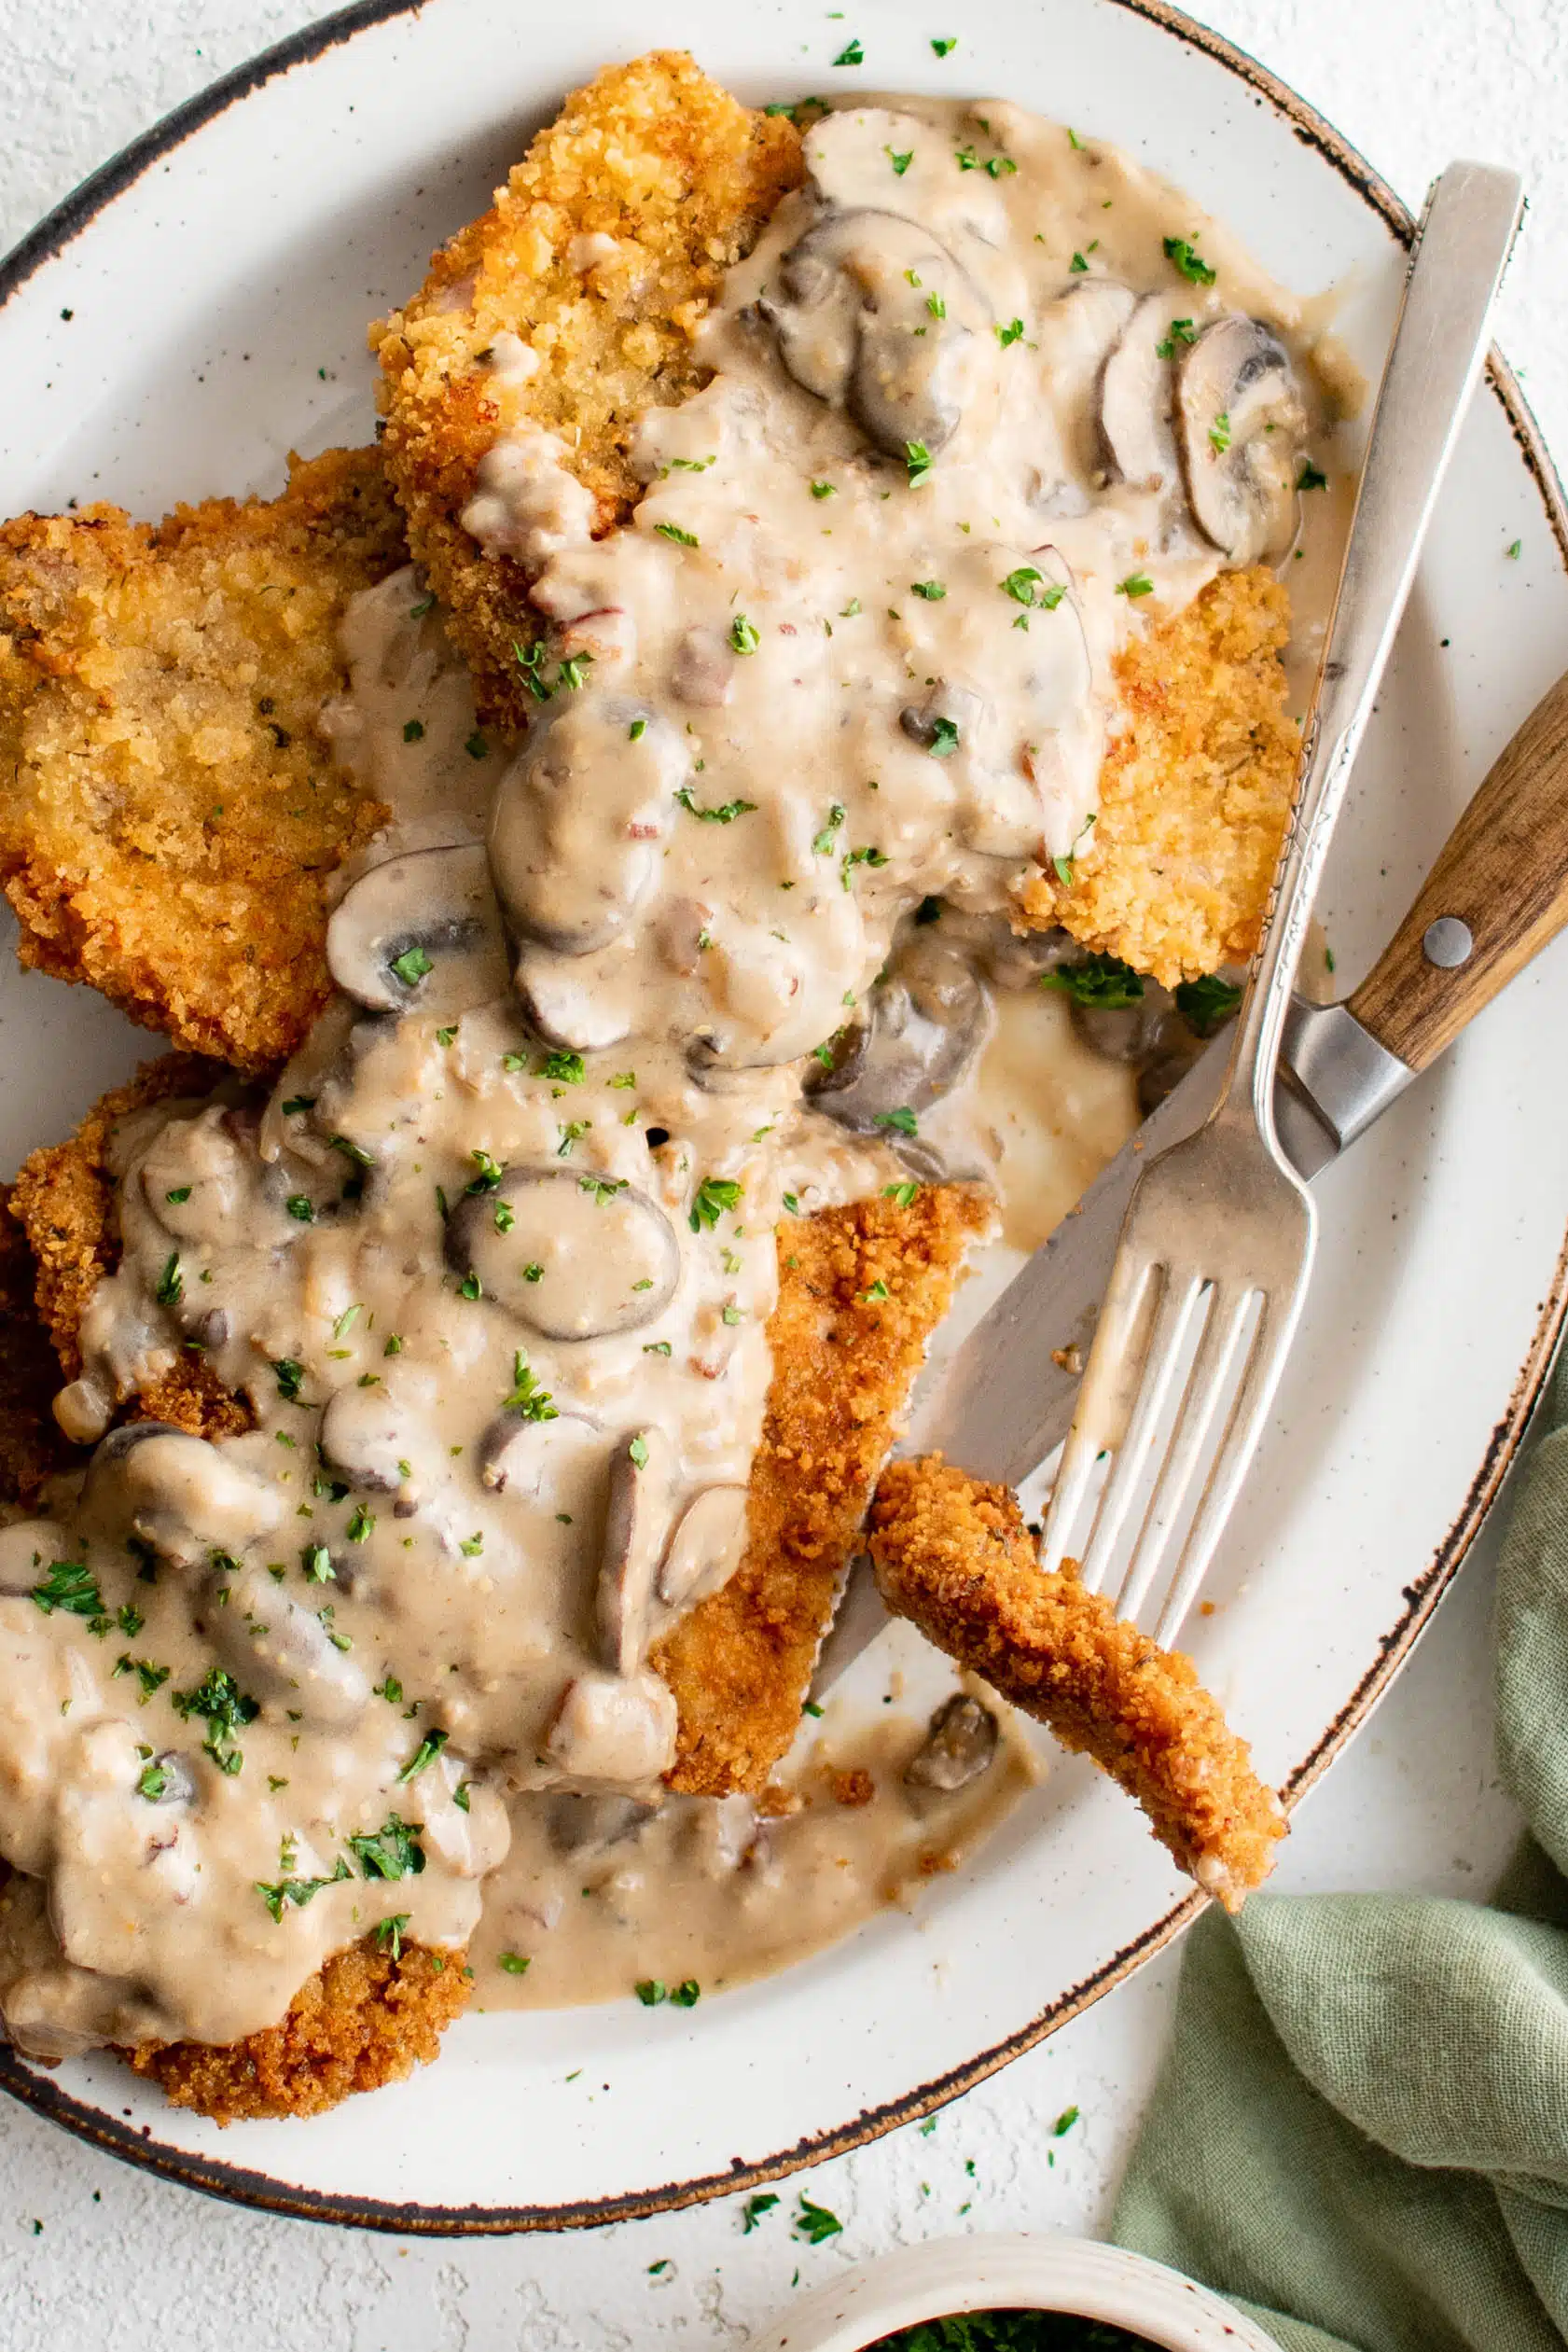 Large platter filled with four breaded and fried pork cutlets smothered in a bacon mushroom cream sauce and garnished with freshly minced parsley.